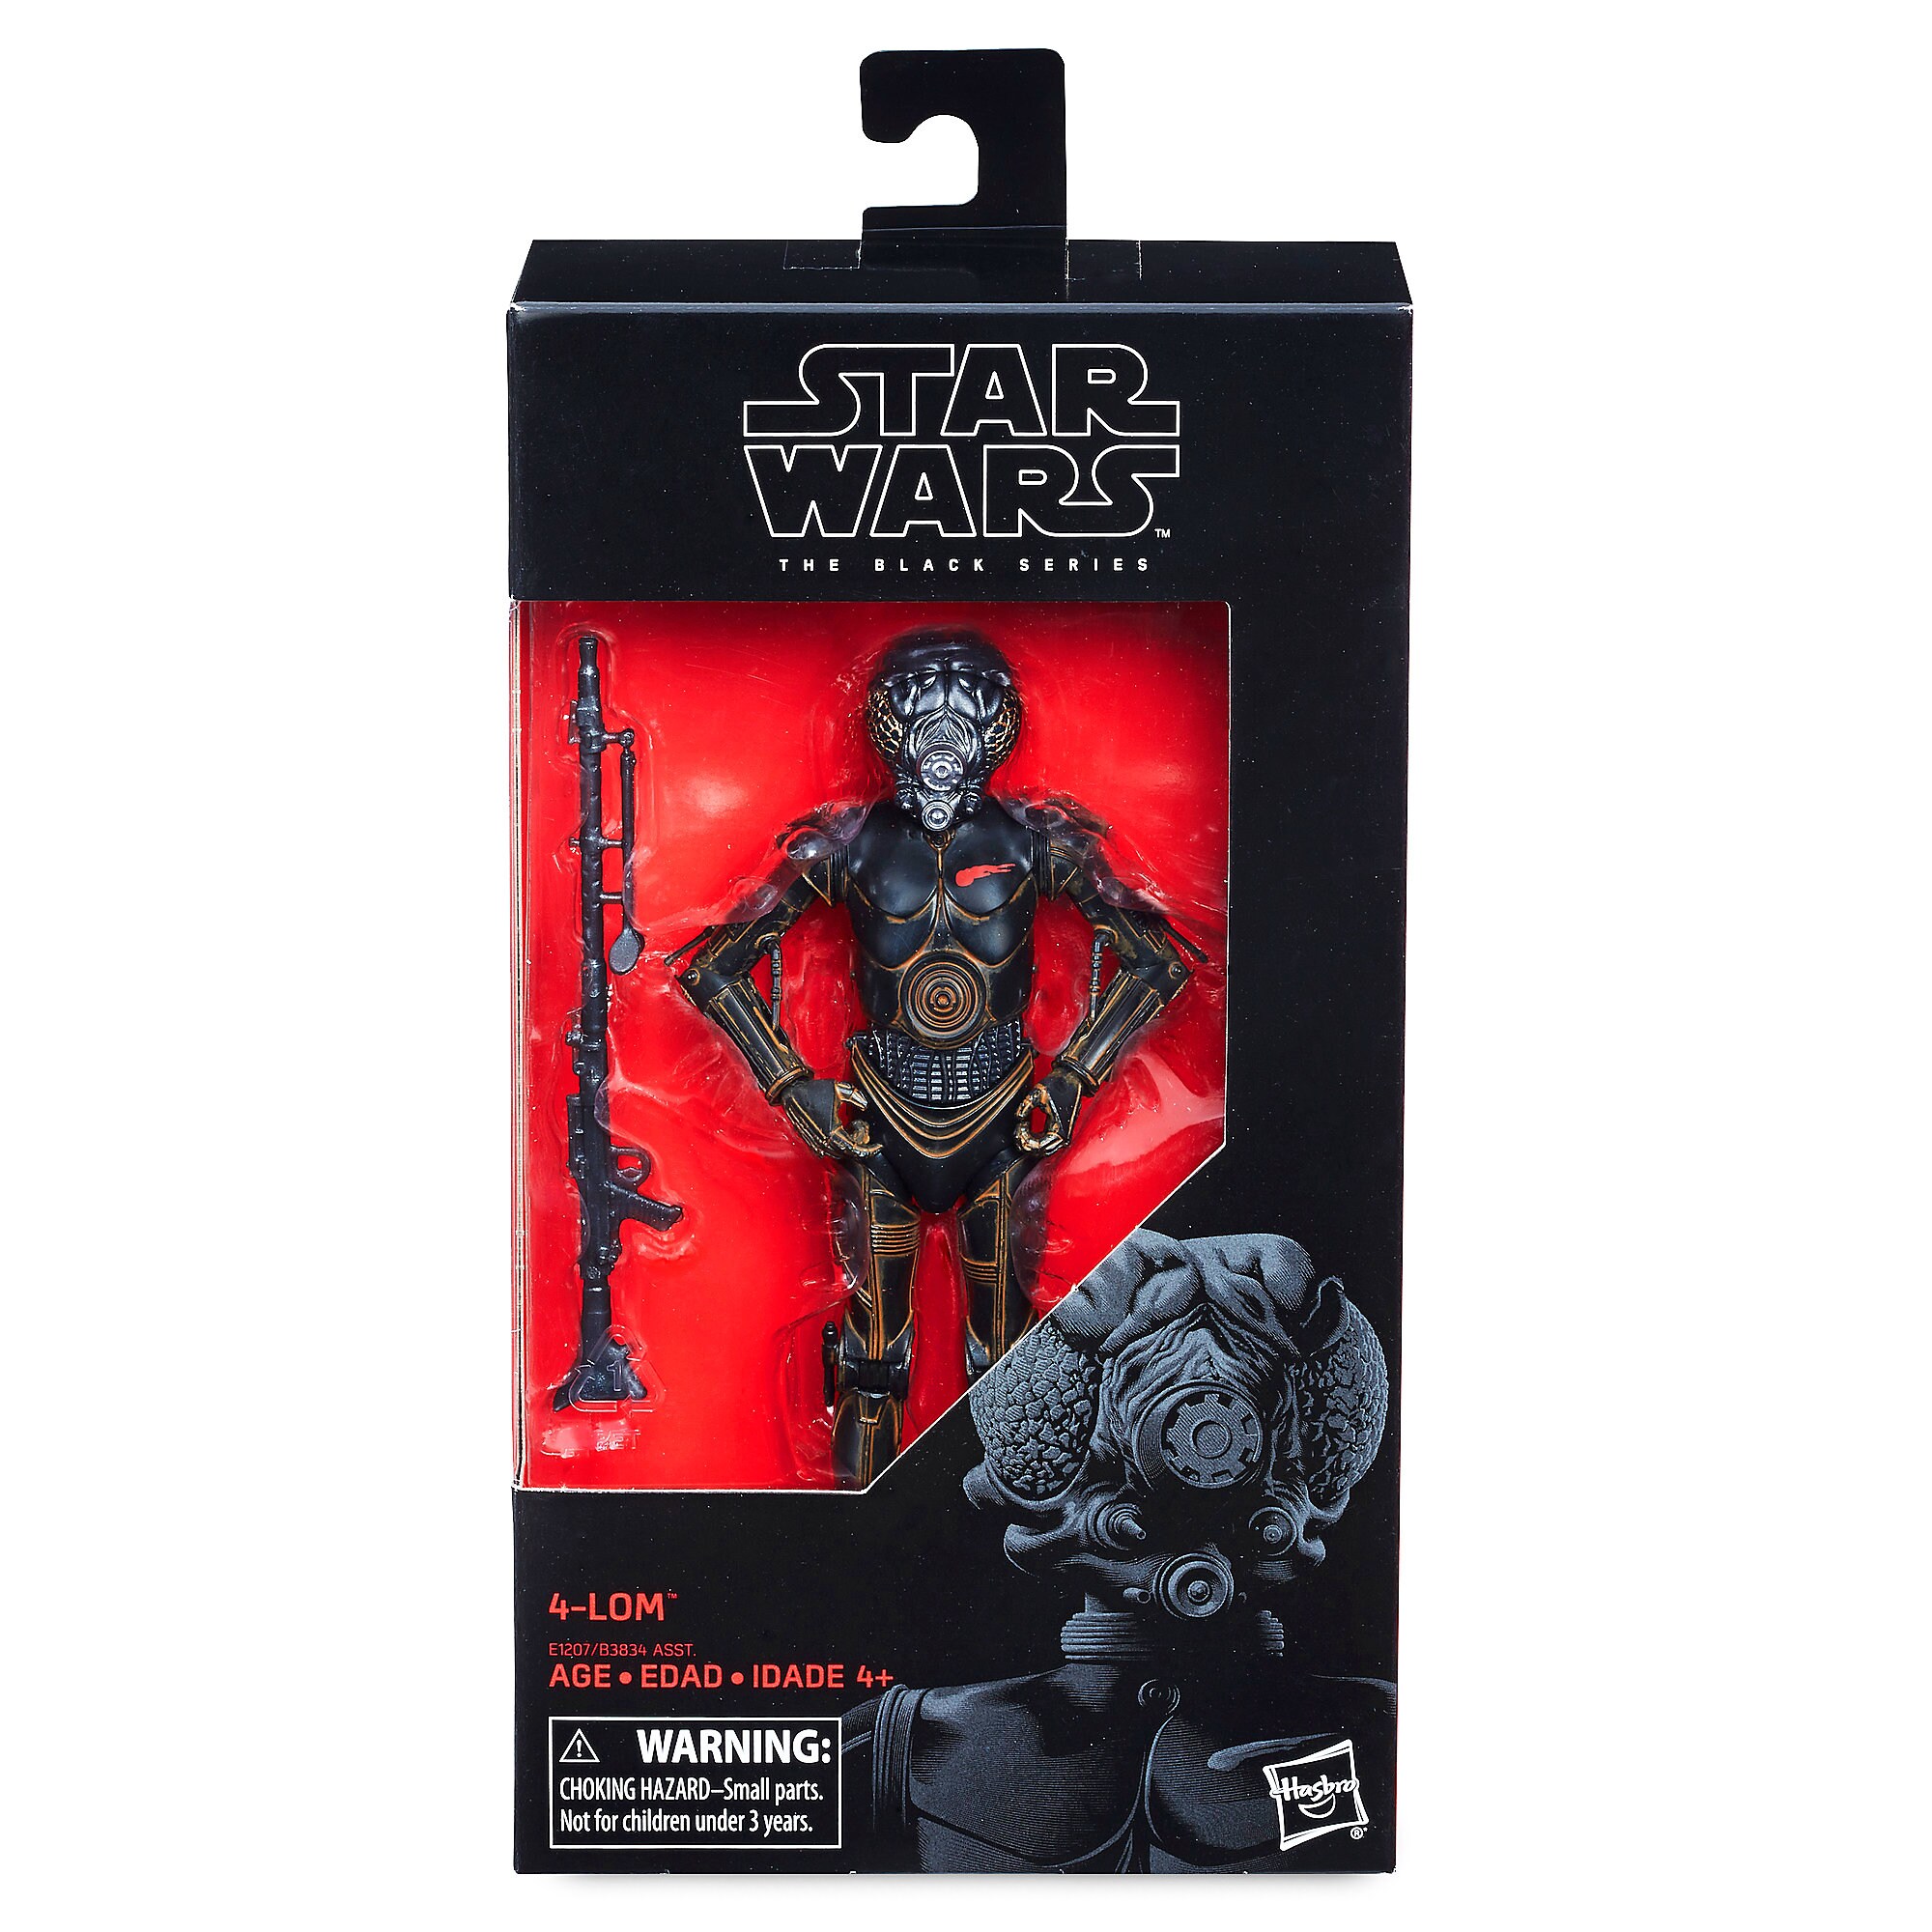 4-LOM Action Figure - Star Wars: The Empire Strikes Back - The Black Series